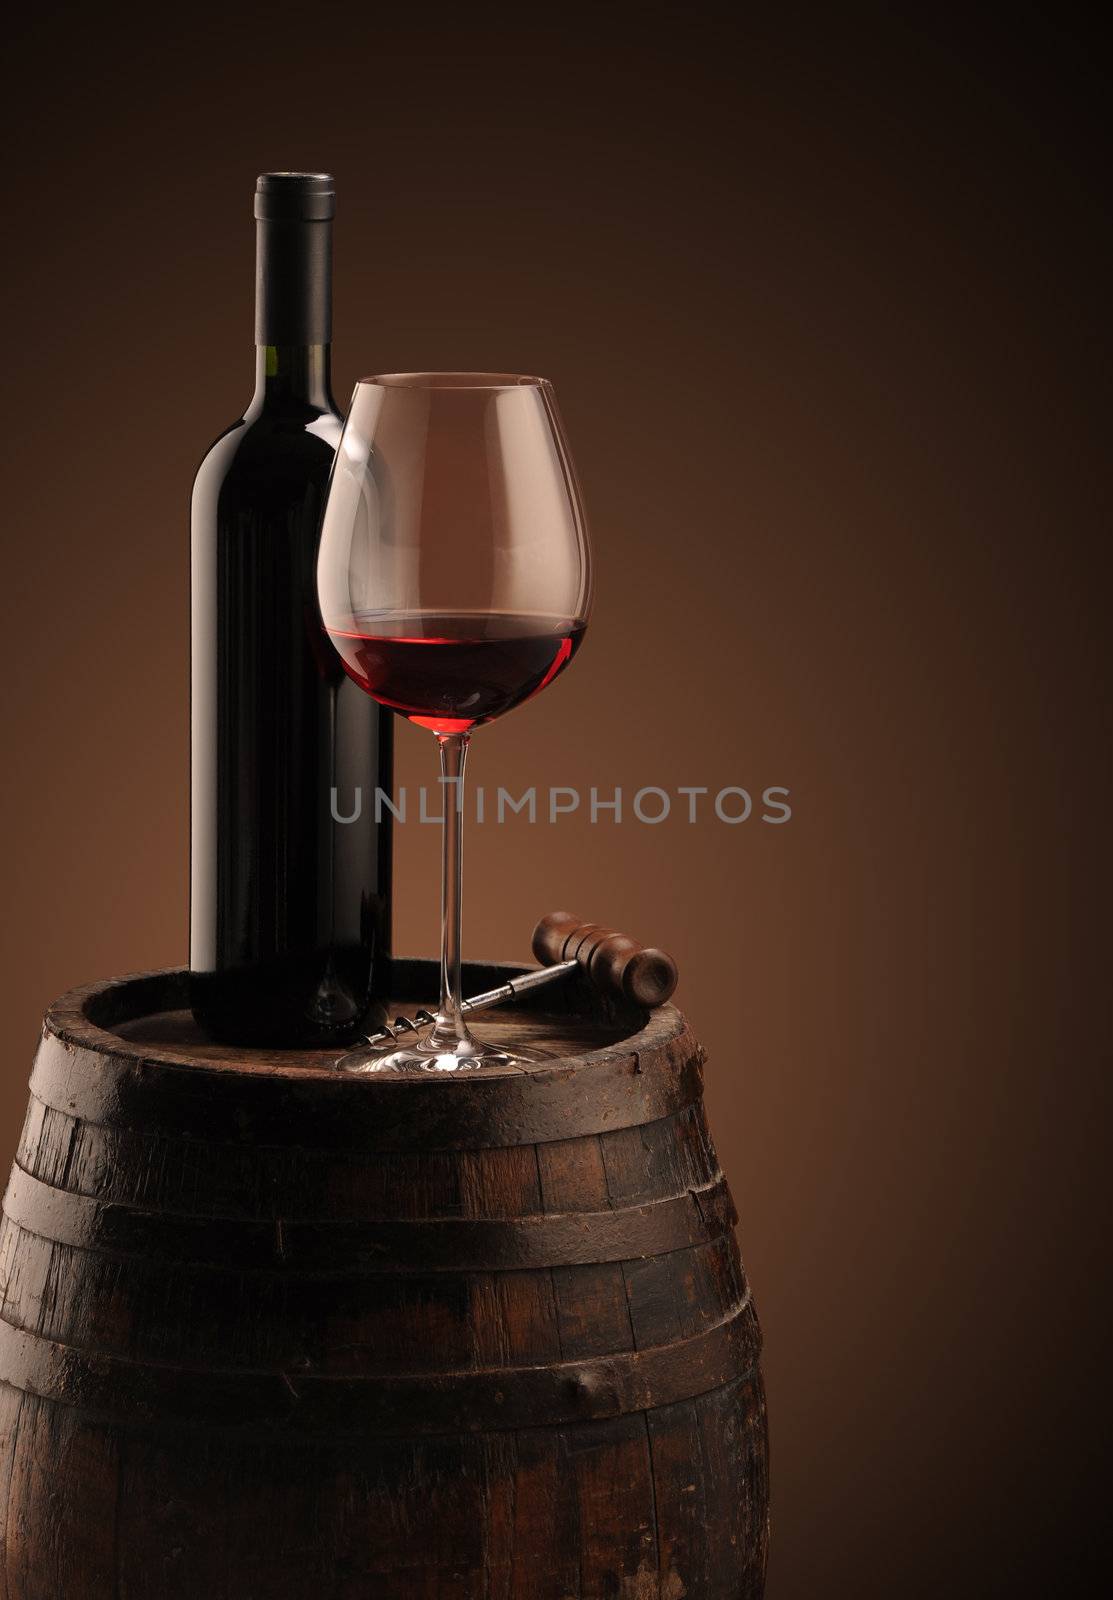 red wine bottle and wine glass on wodden barrel